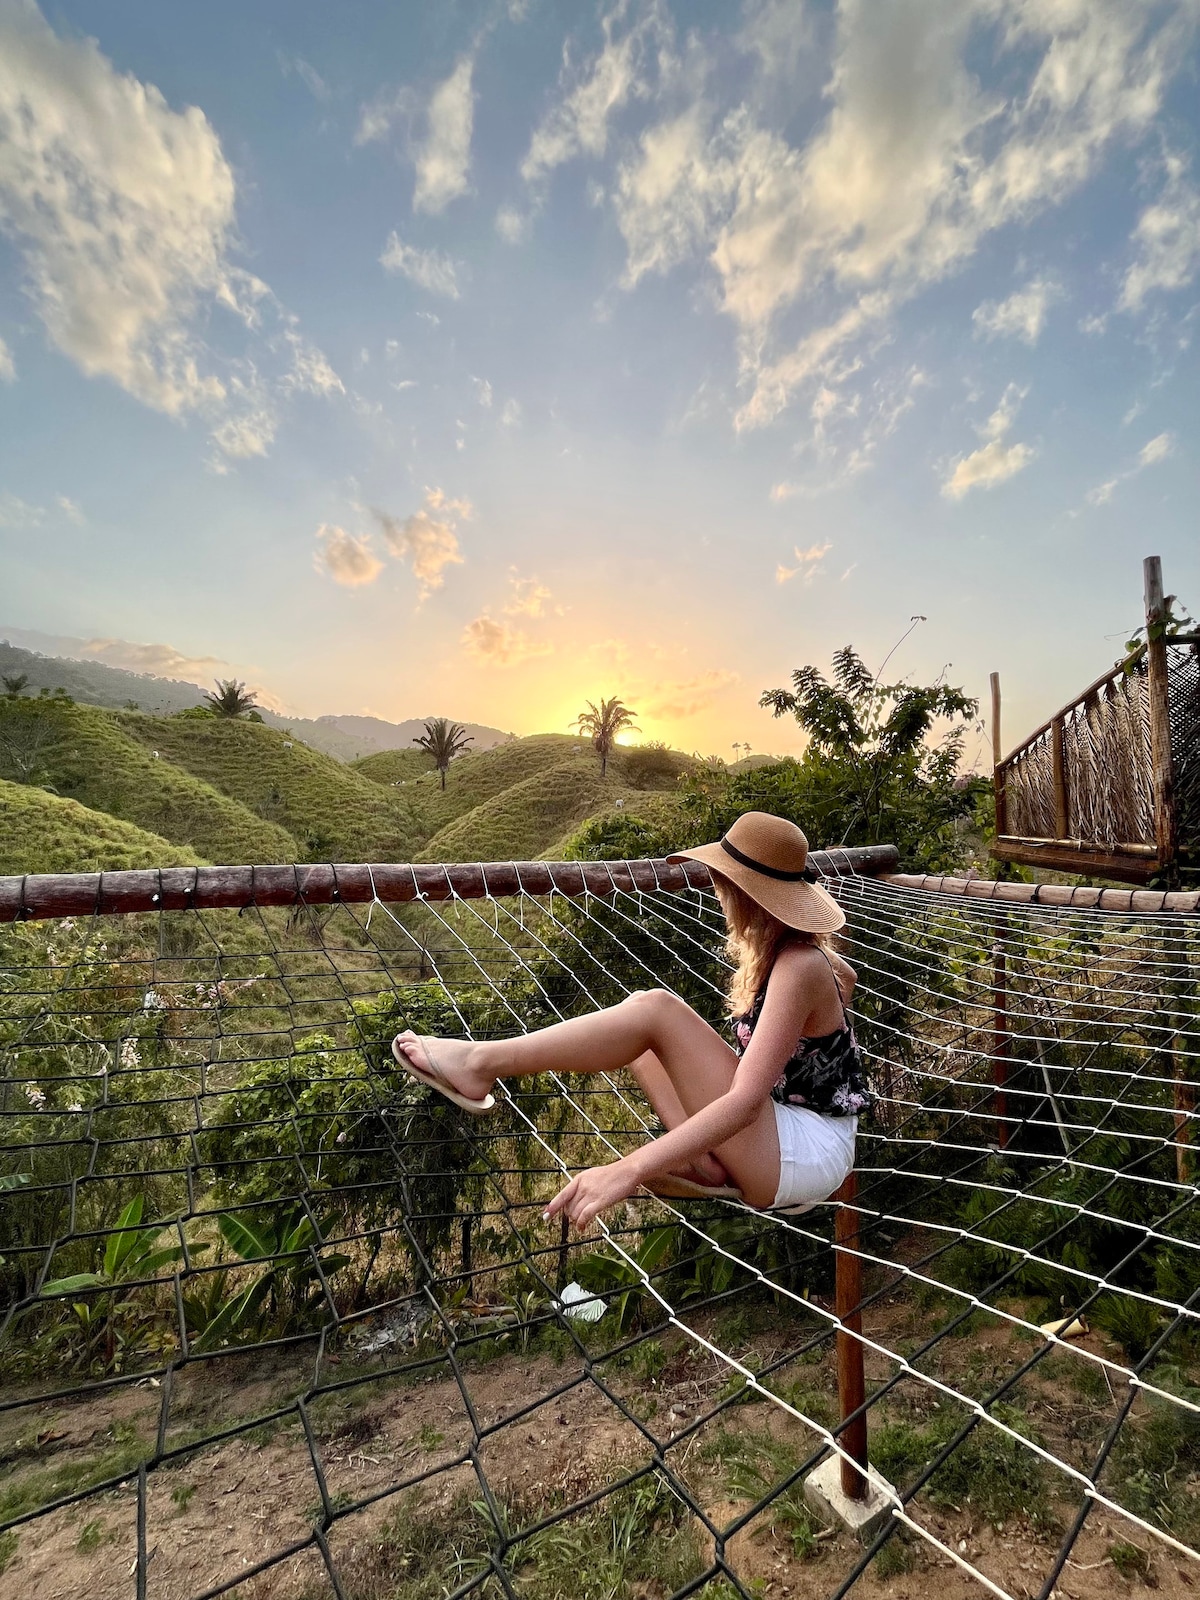 Jungletreehouse with spectacular view•Valleyhostel